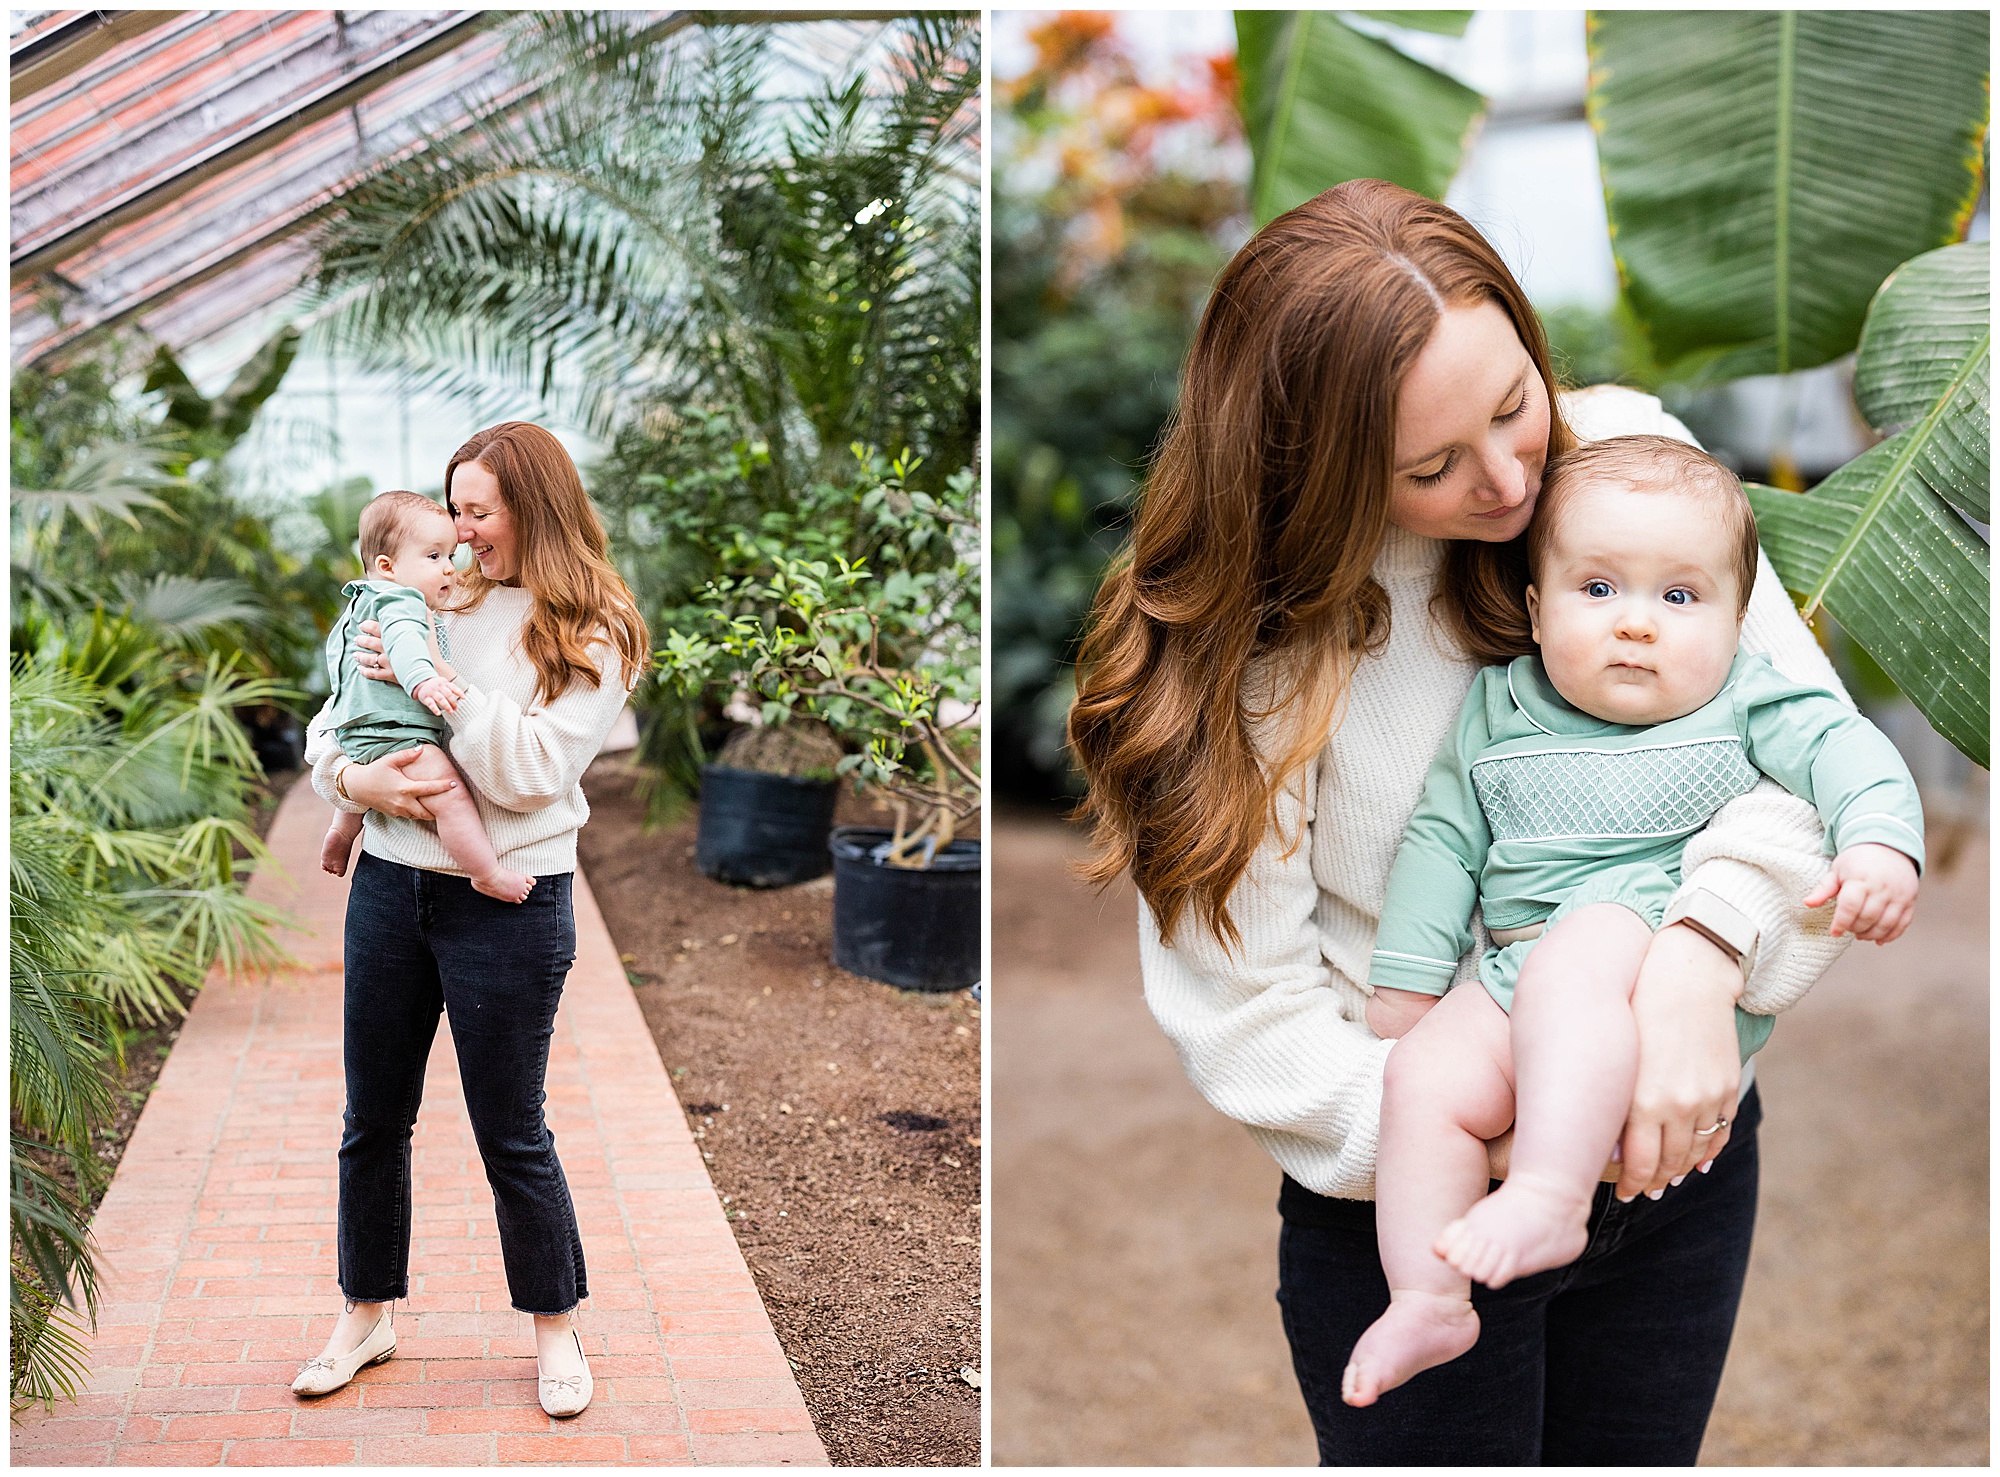 Eleanor Stenner Photography - a Birmingham, AL wedding photographer - photographs Katie & Henry in her Valentine's Day Mini Sessions